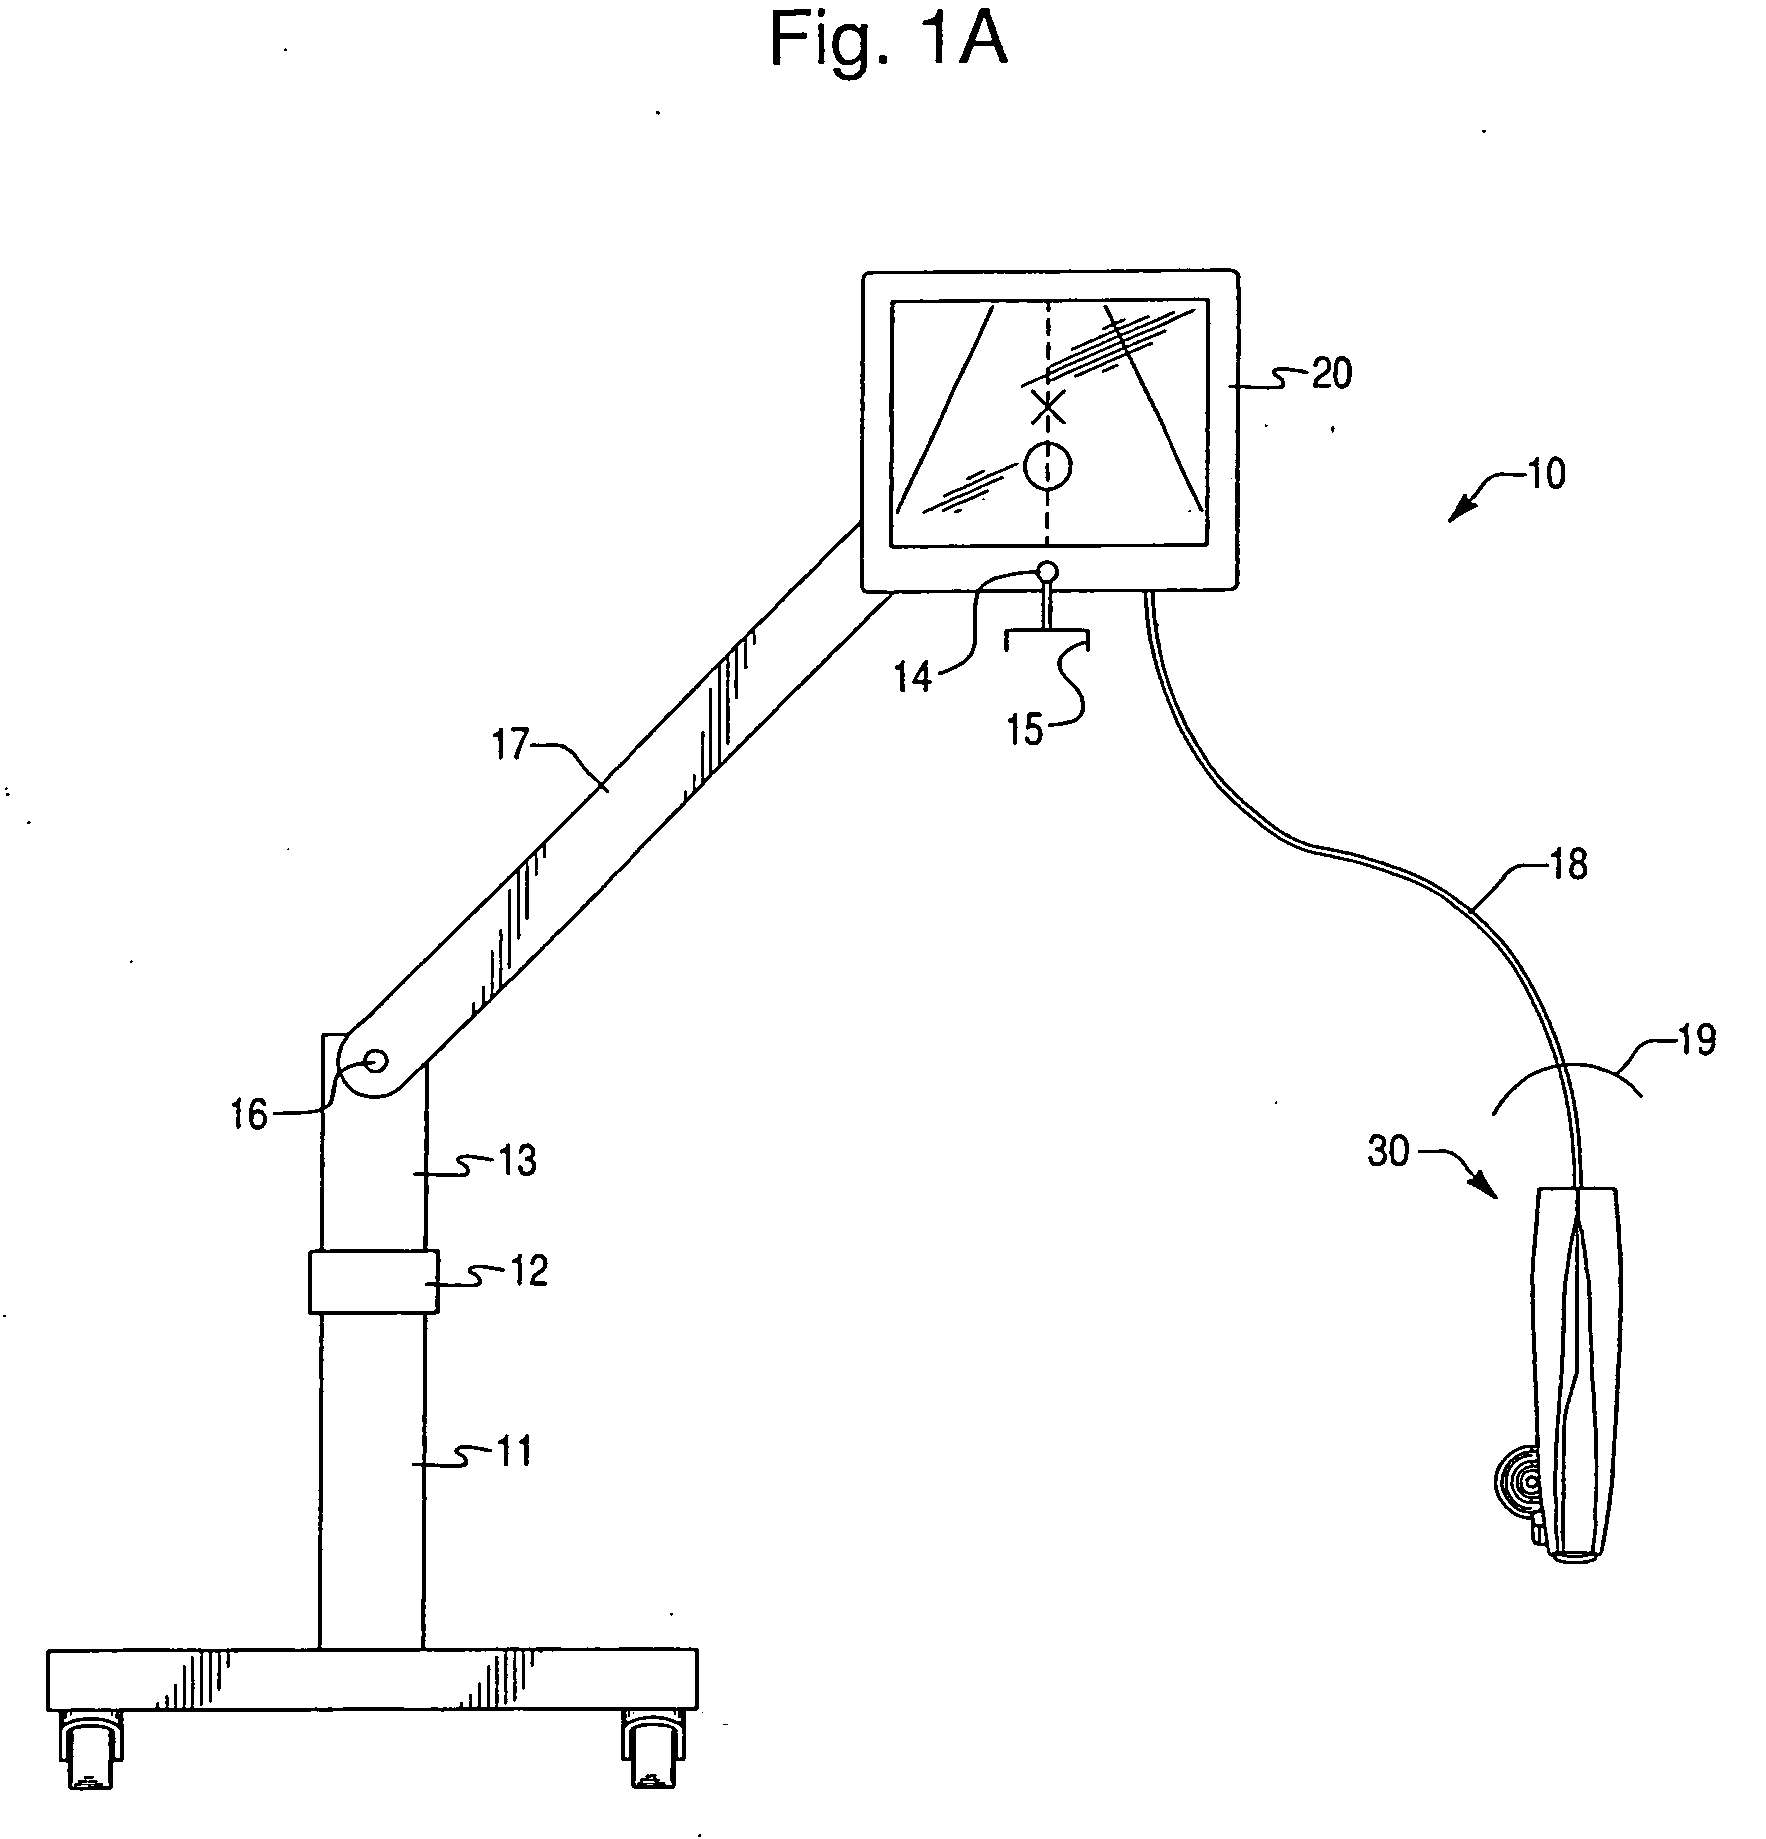 Sterile shell for an ultrasonic probe and method of using same